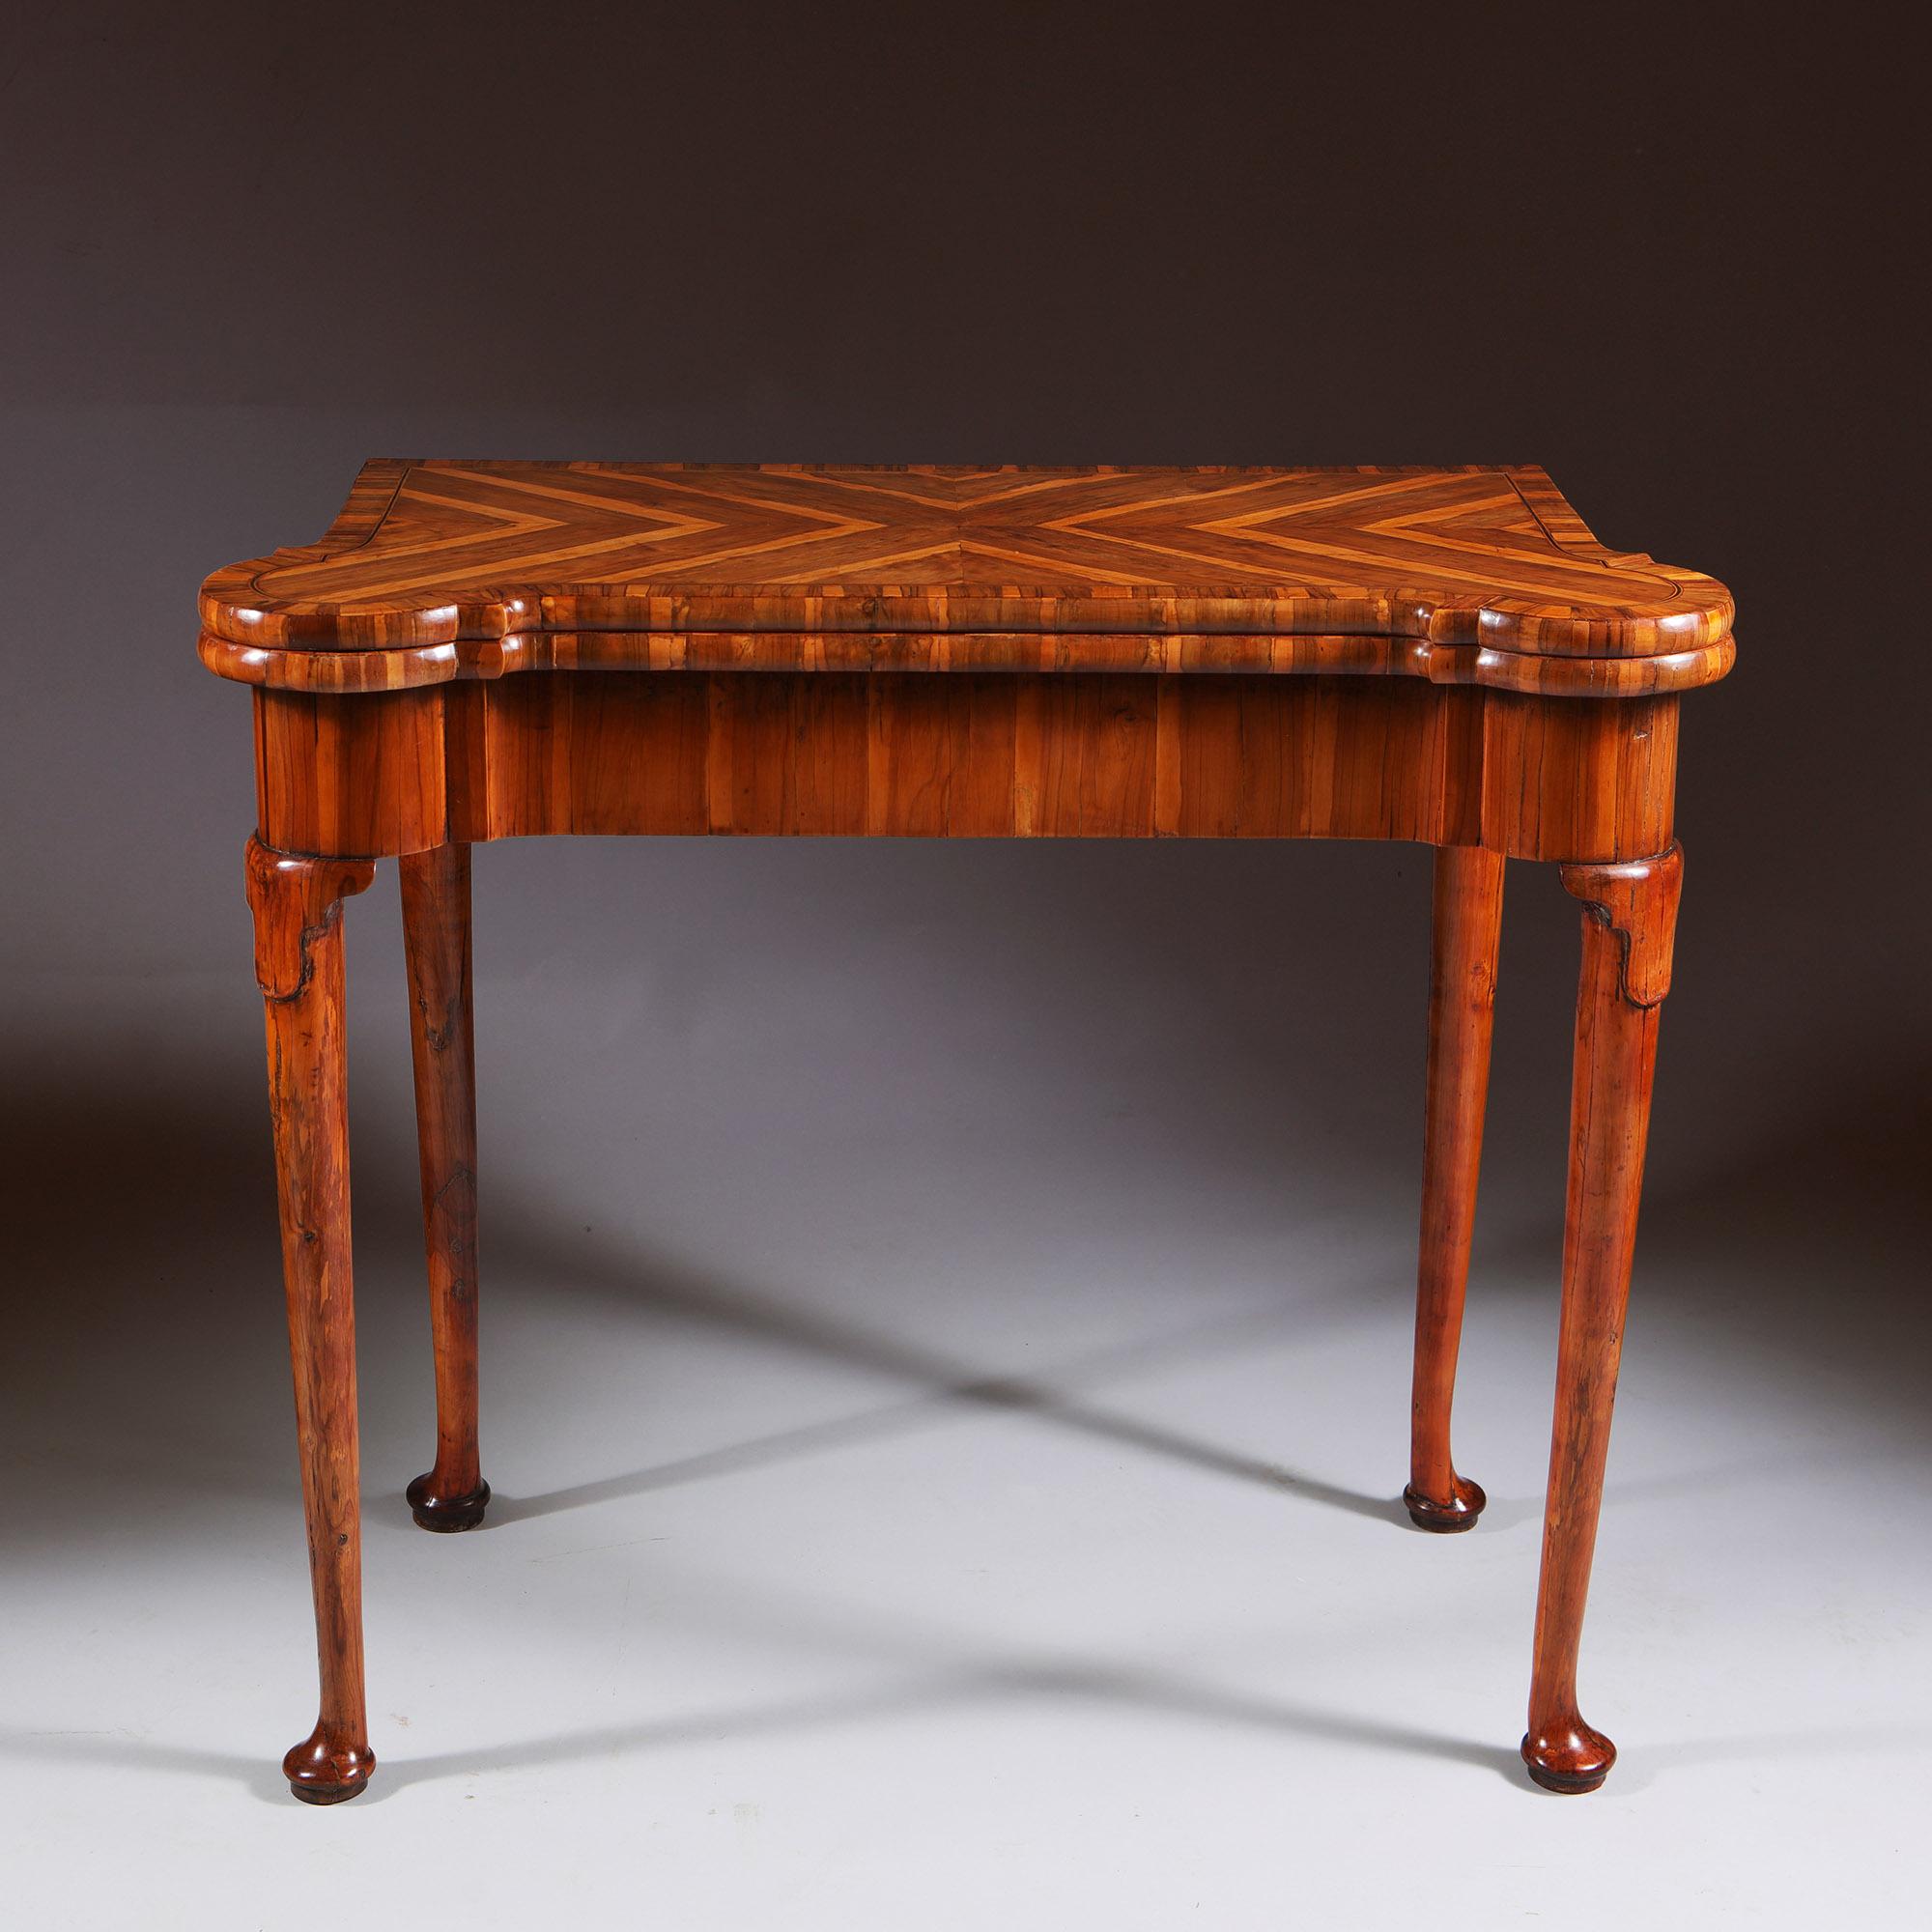 Museum Grade George I Cocus Wood Card Table (Partridge). -

English Circa 1725. The folding top with outset rounded corners and banded in quarter veneered parquetry top above a shaped frieze with hinged folding concertina action to the back legs to